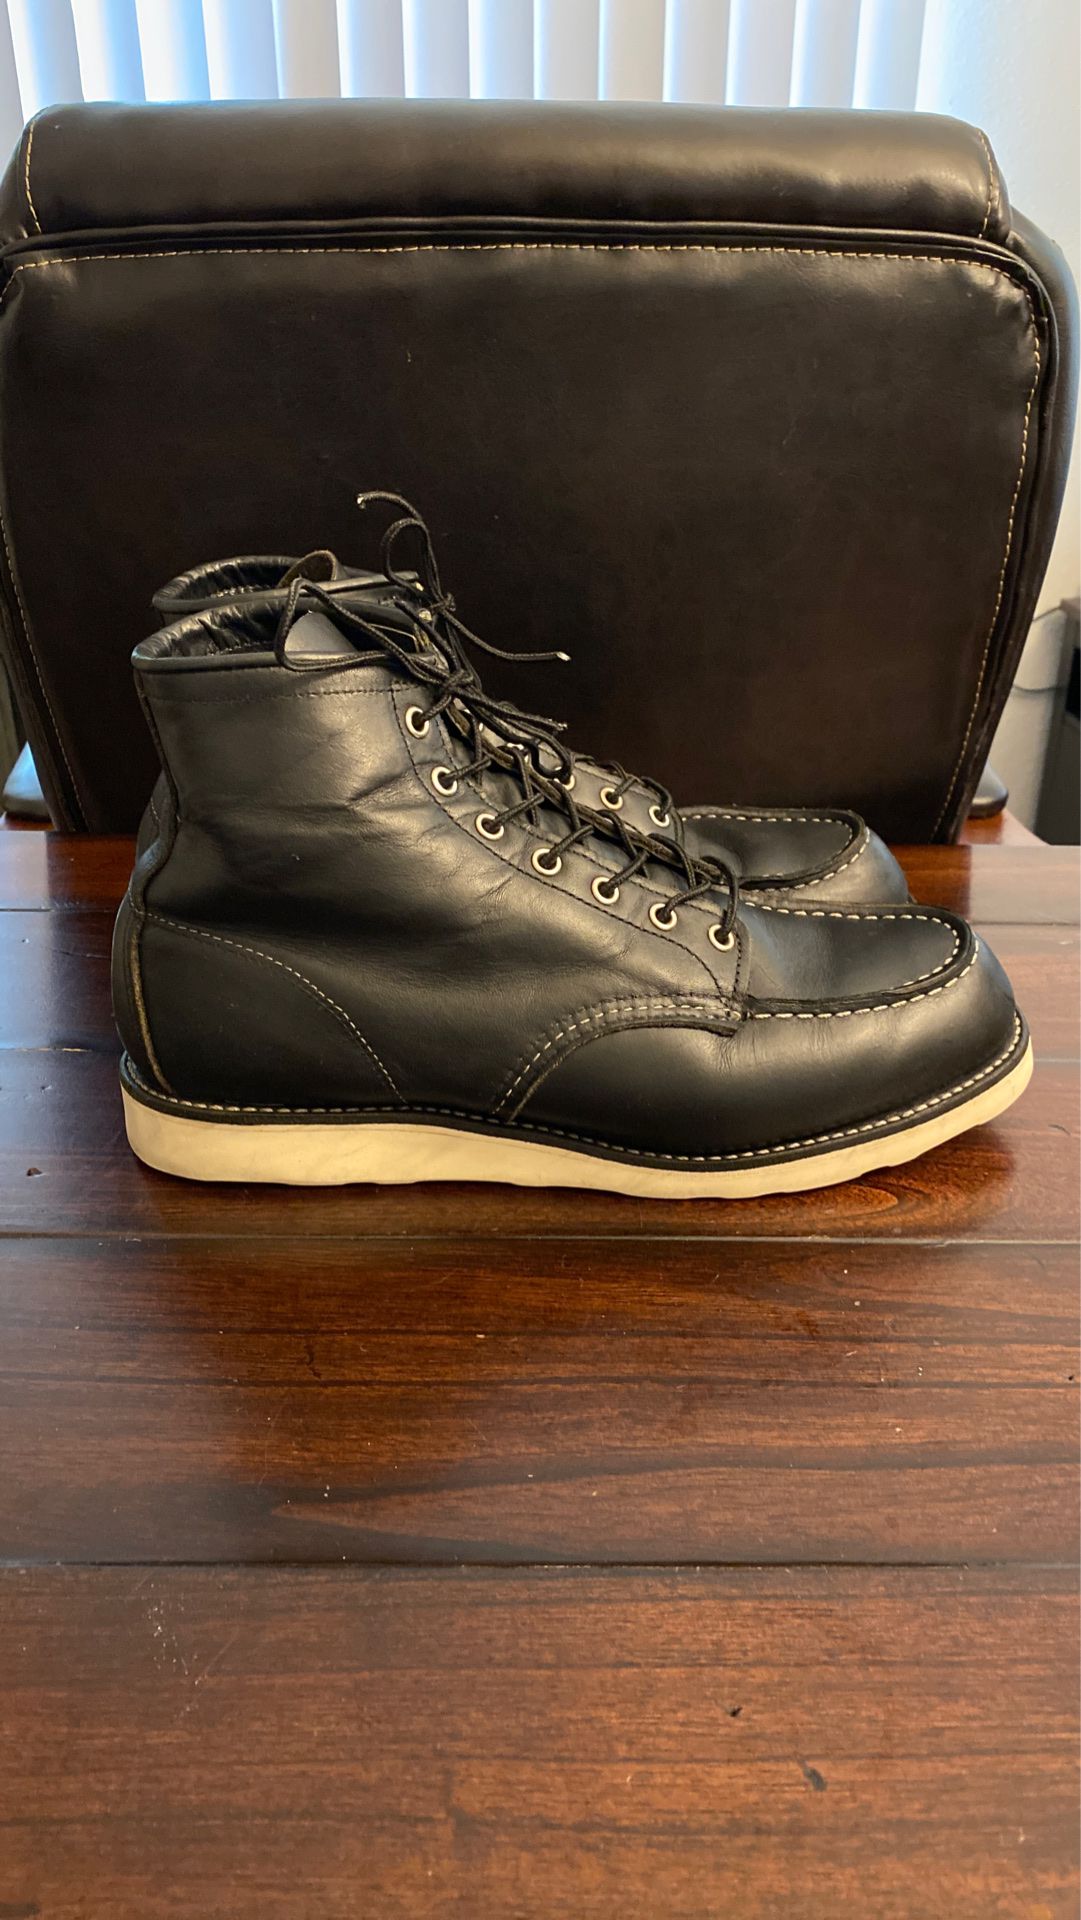 Red Wing Boots - 9075 Black Harness Leather size 10.5